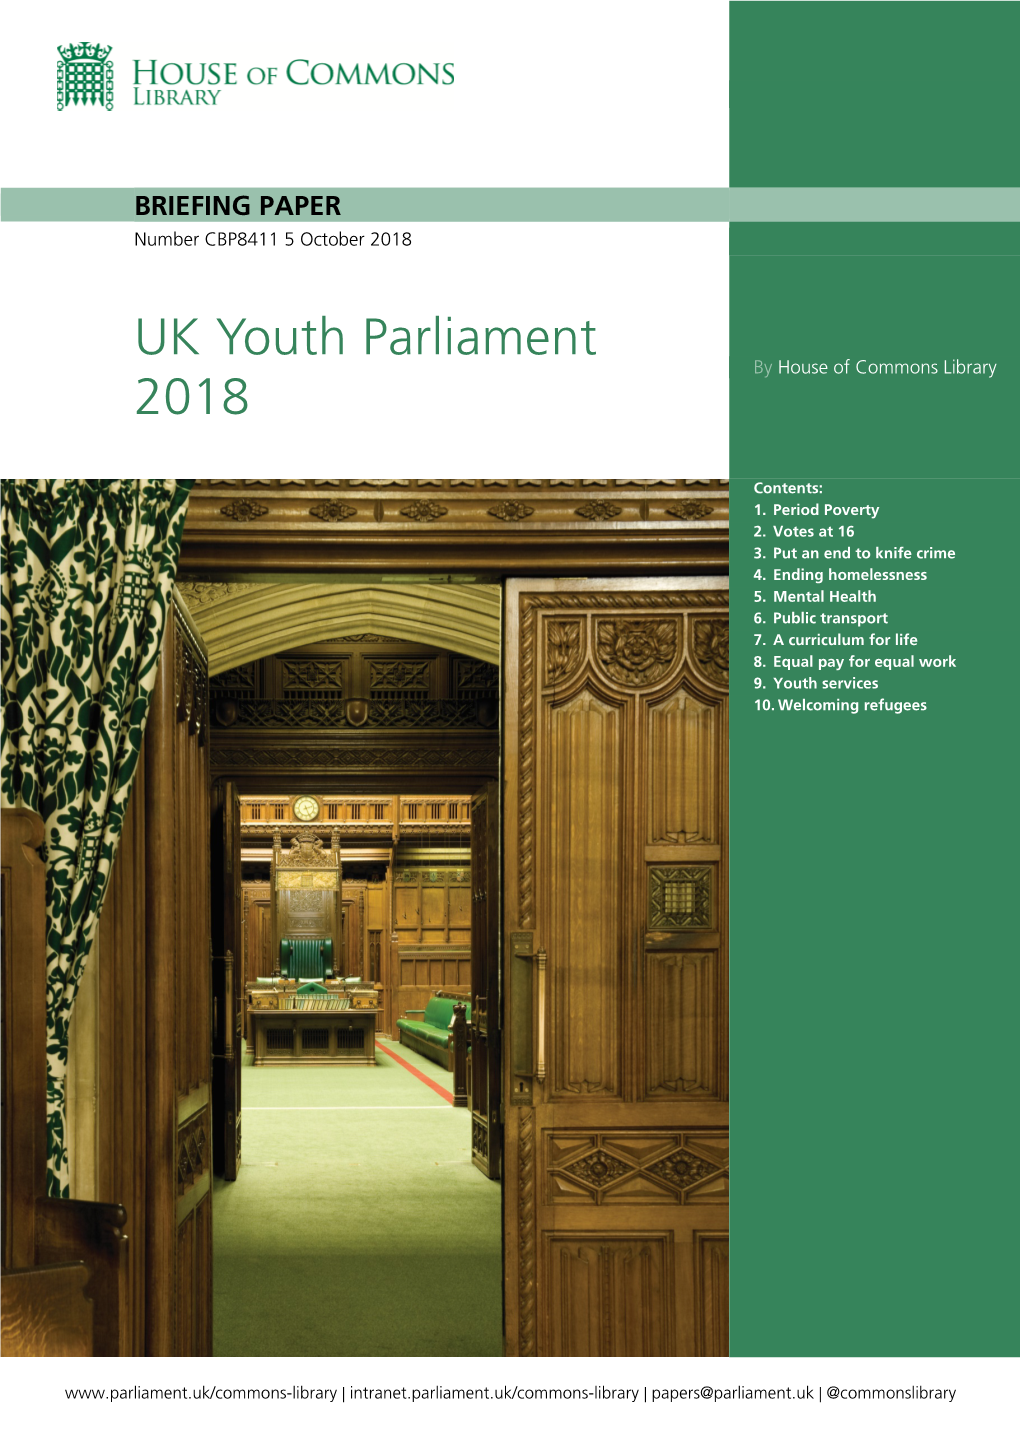 UK Youth Parliament 2018